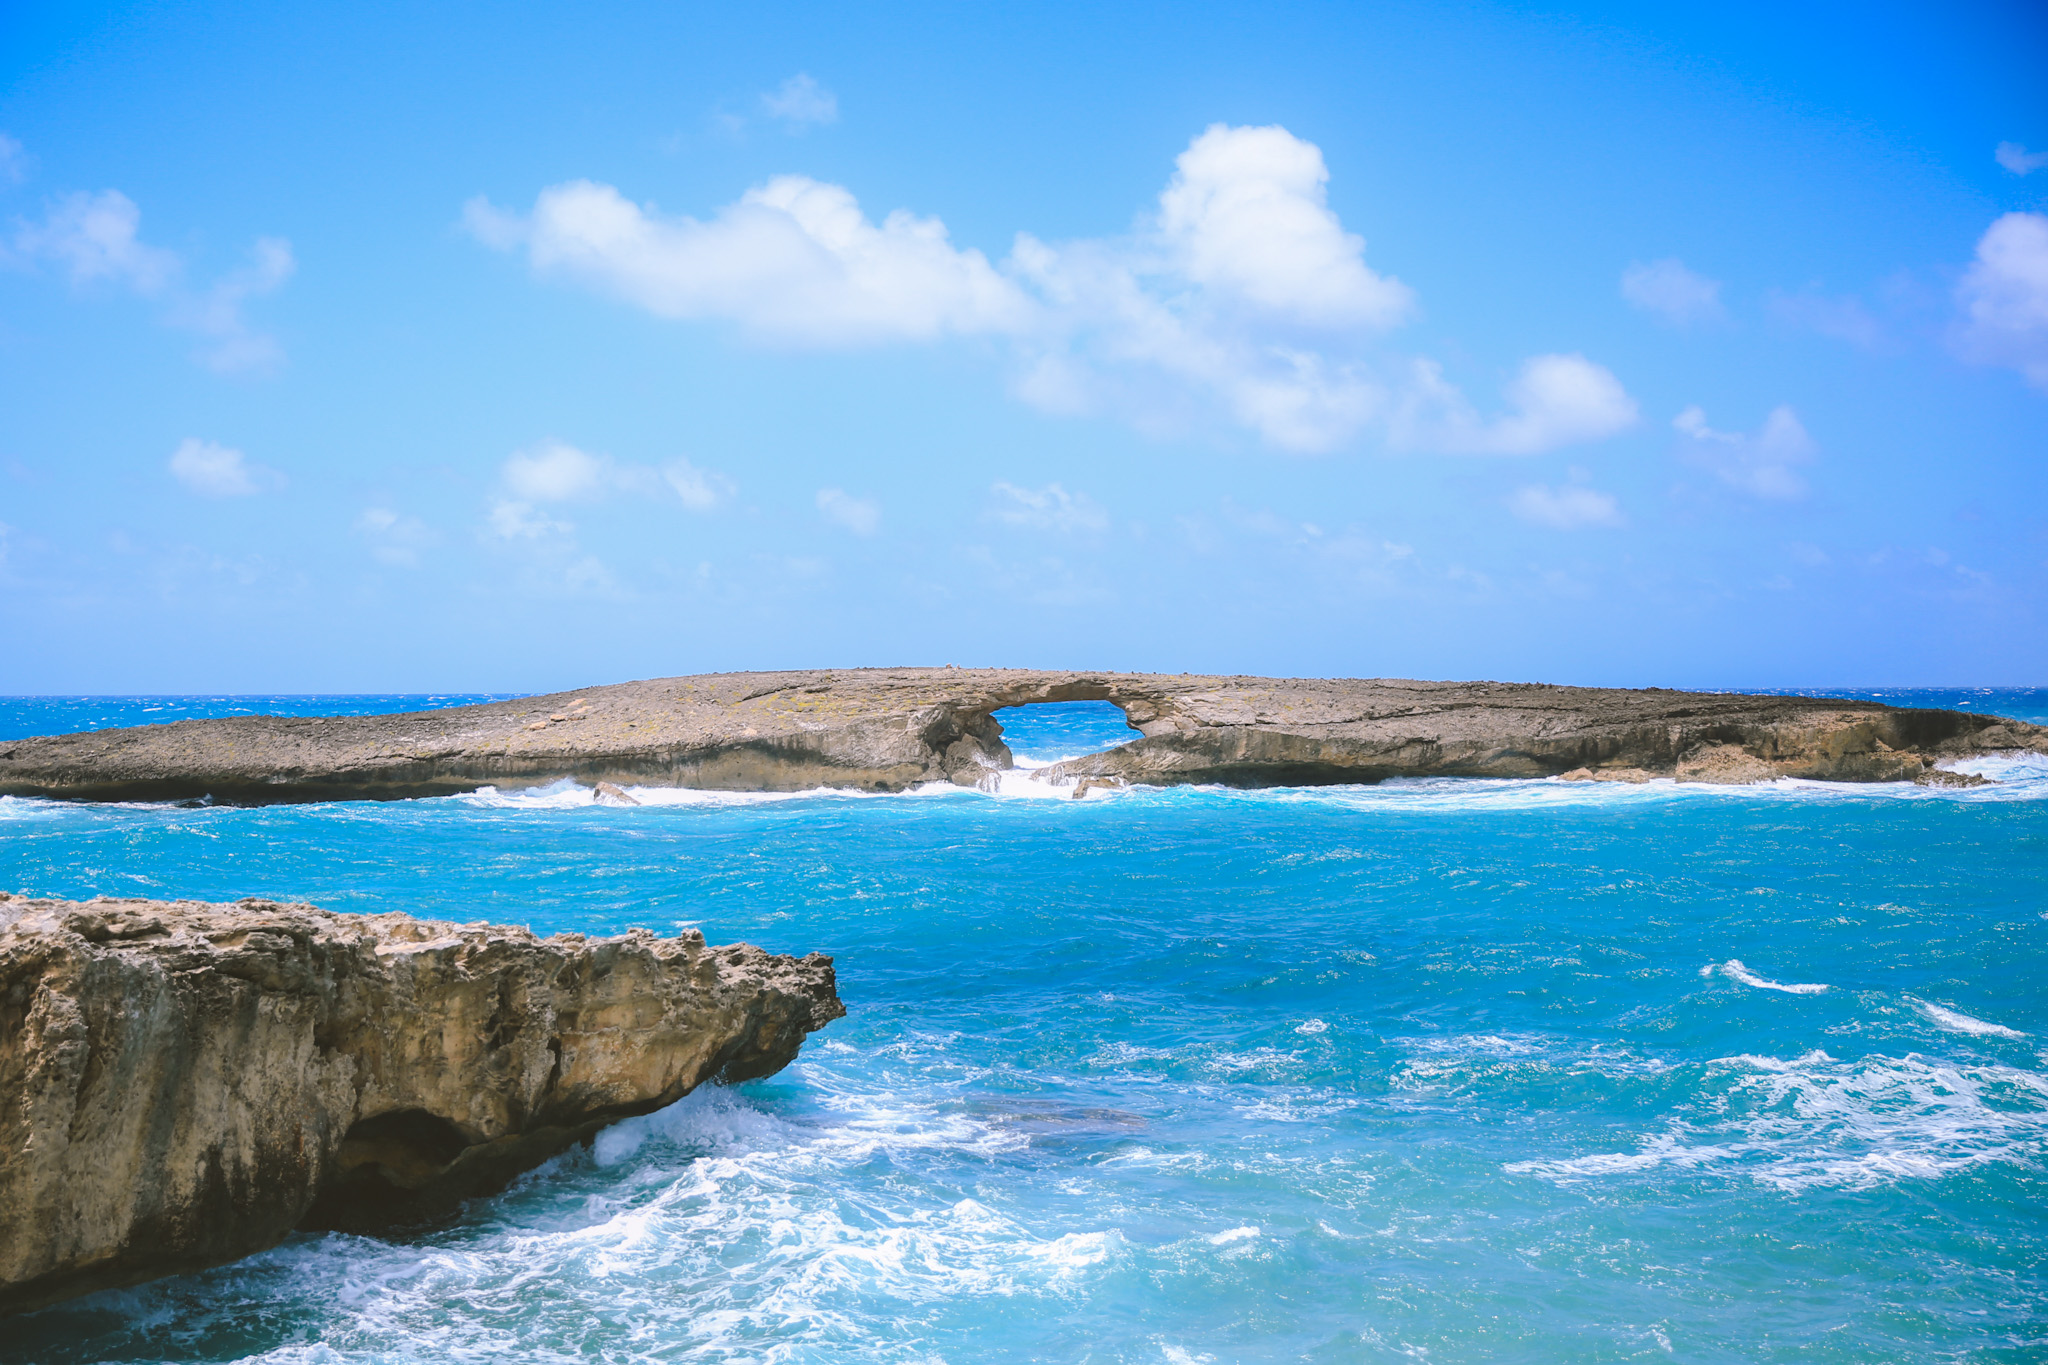 Laie Point - Rocky cliffs with steep drops into the blue ocean on Oahu Hawaii's North Shore